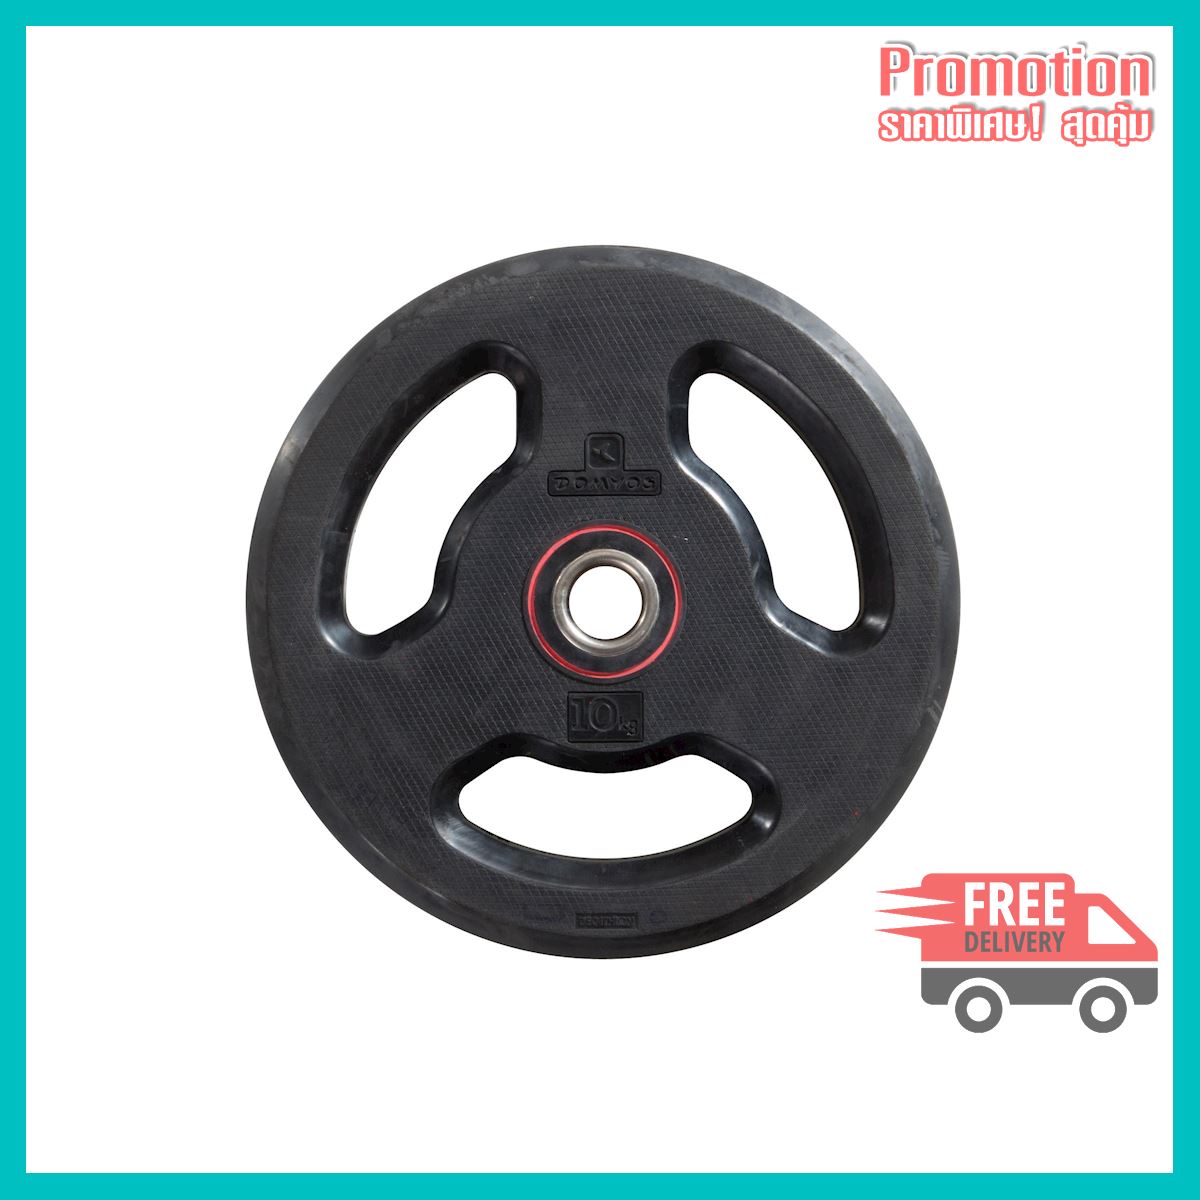 Rubber Weight Disc with Handles 28 mm - 10 kg